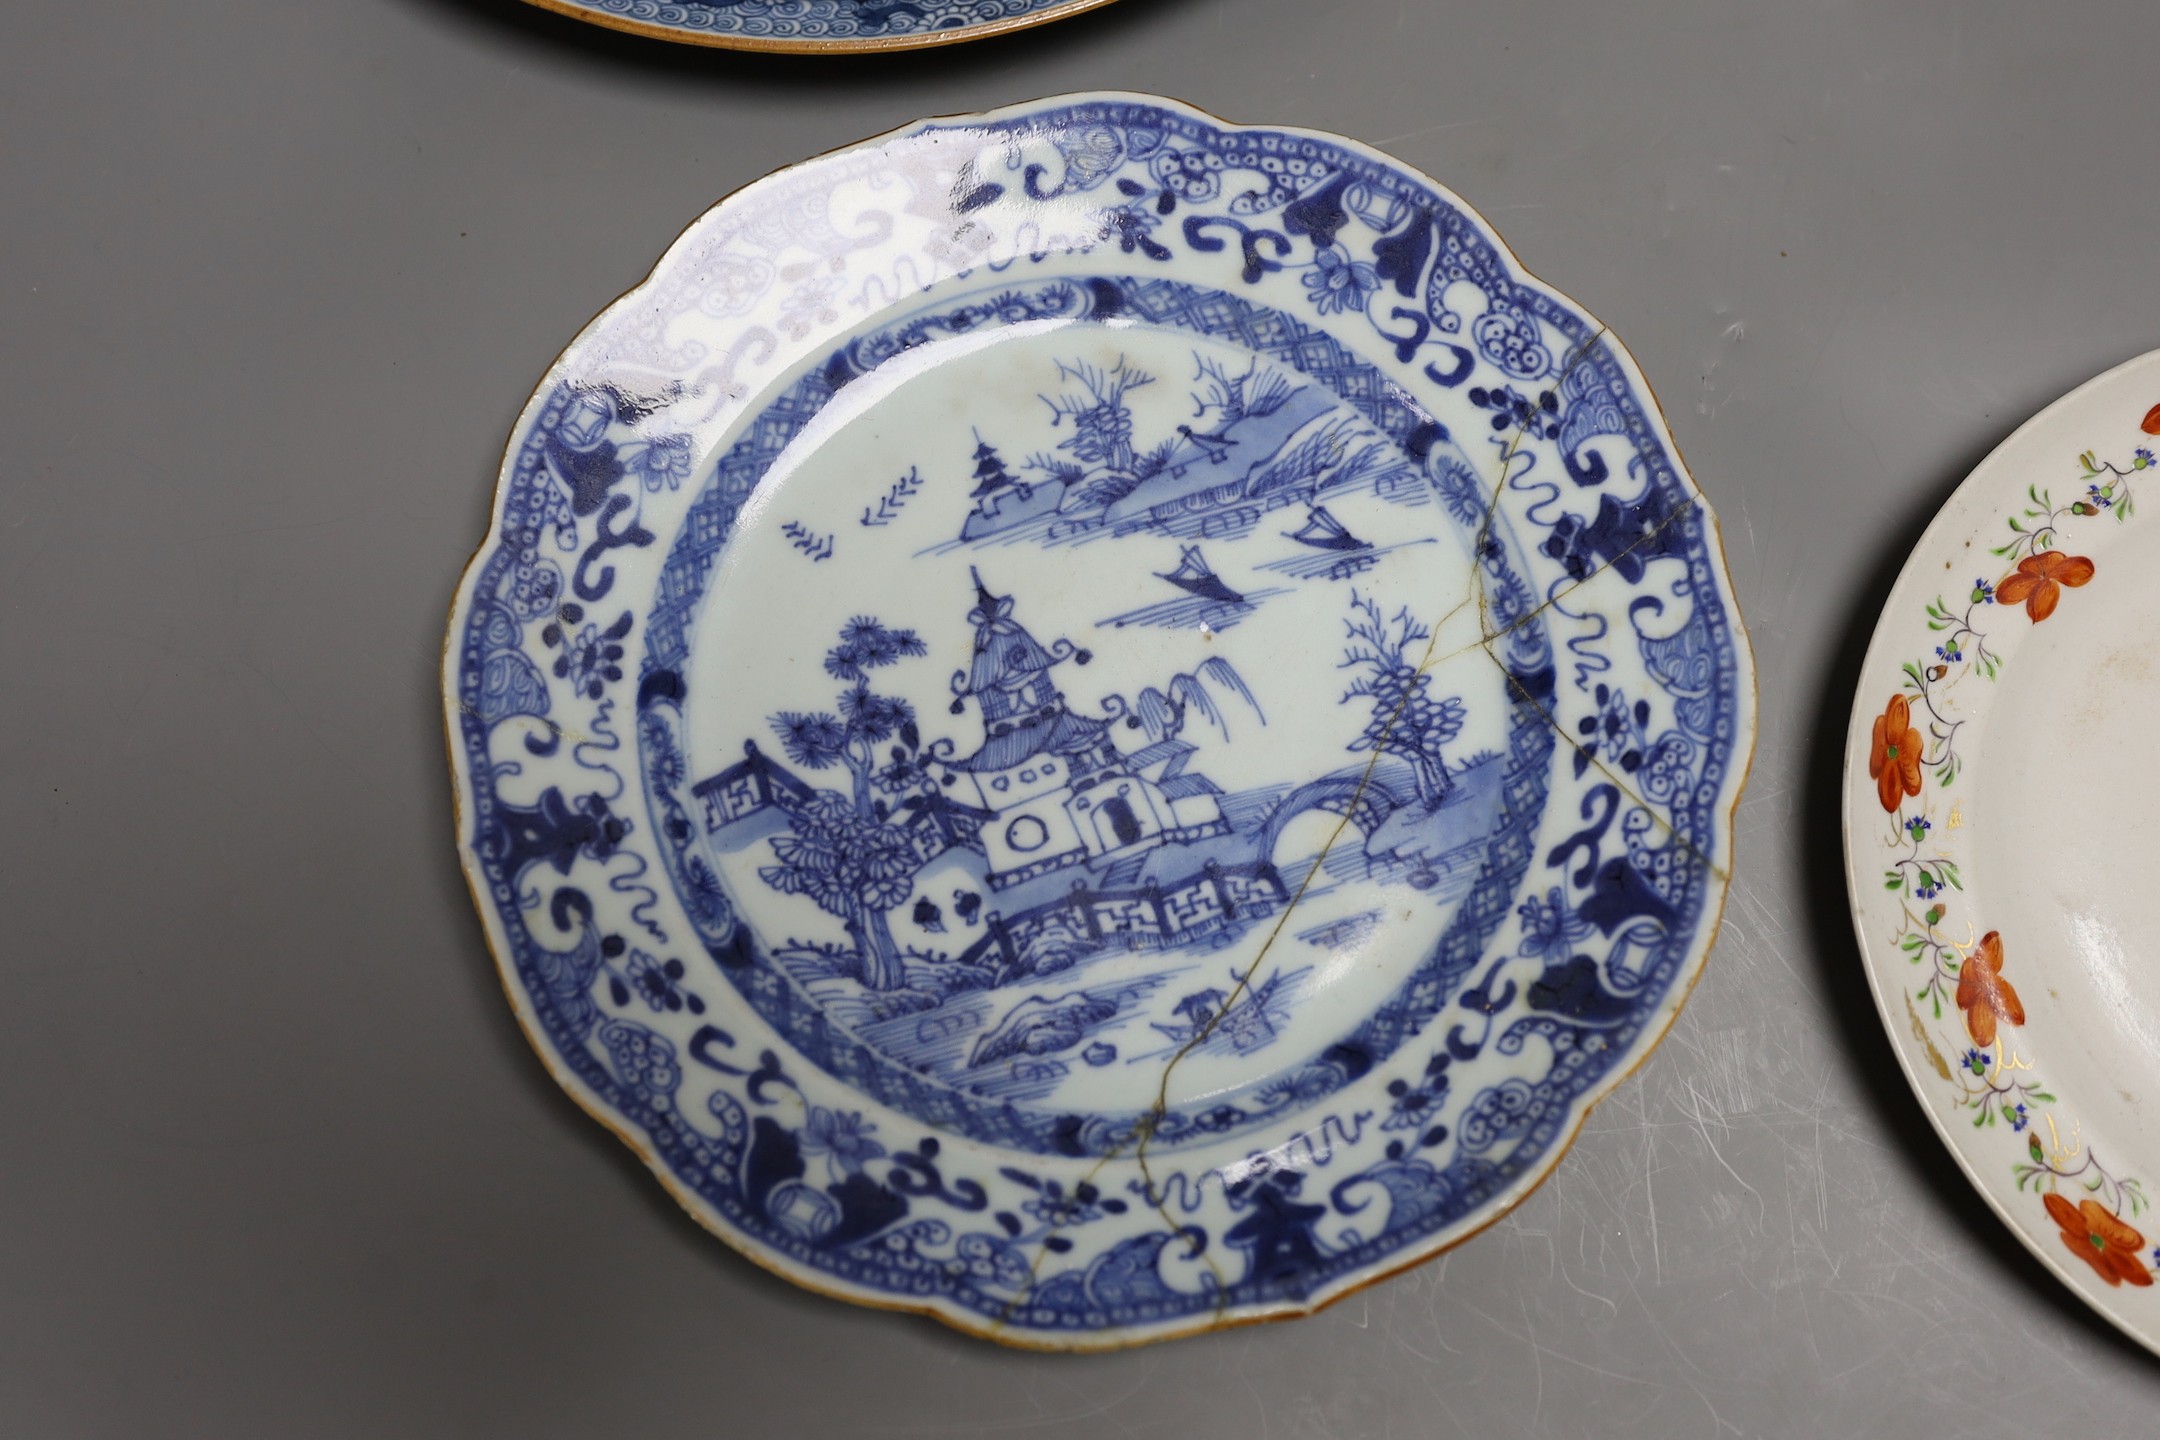 Four 18th / 19th century Chinese plates, and a later dishlargest plate 29 cms diameter, - Image 6 of 6